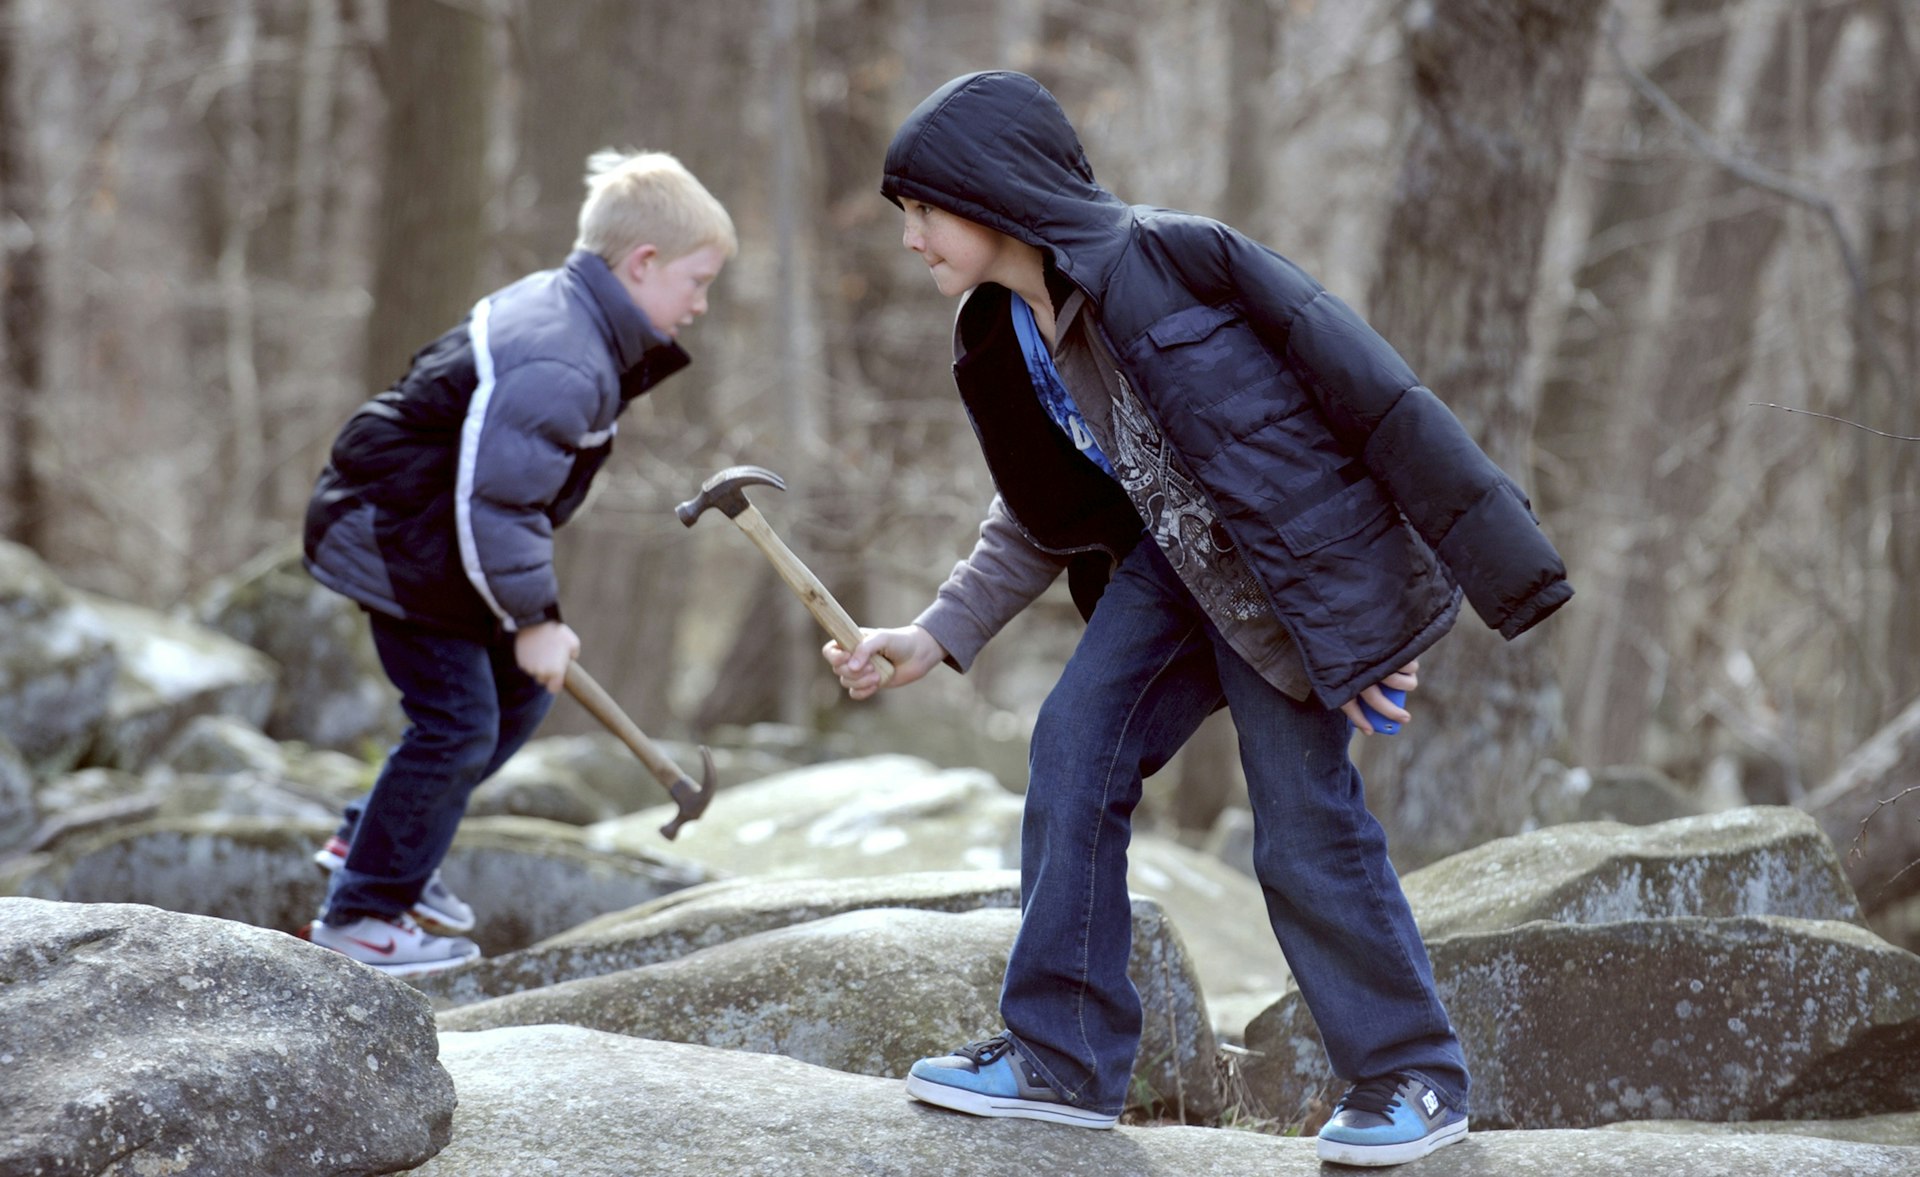 Two boys in winter coats hold hammers and stand on boulders © Allentown Morning Call / Getty Images